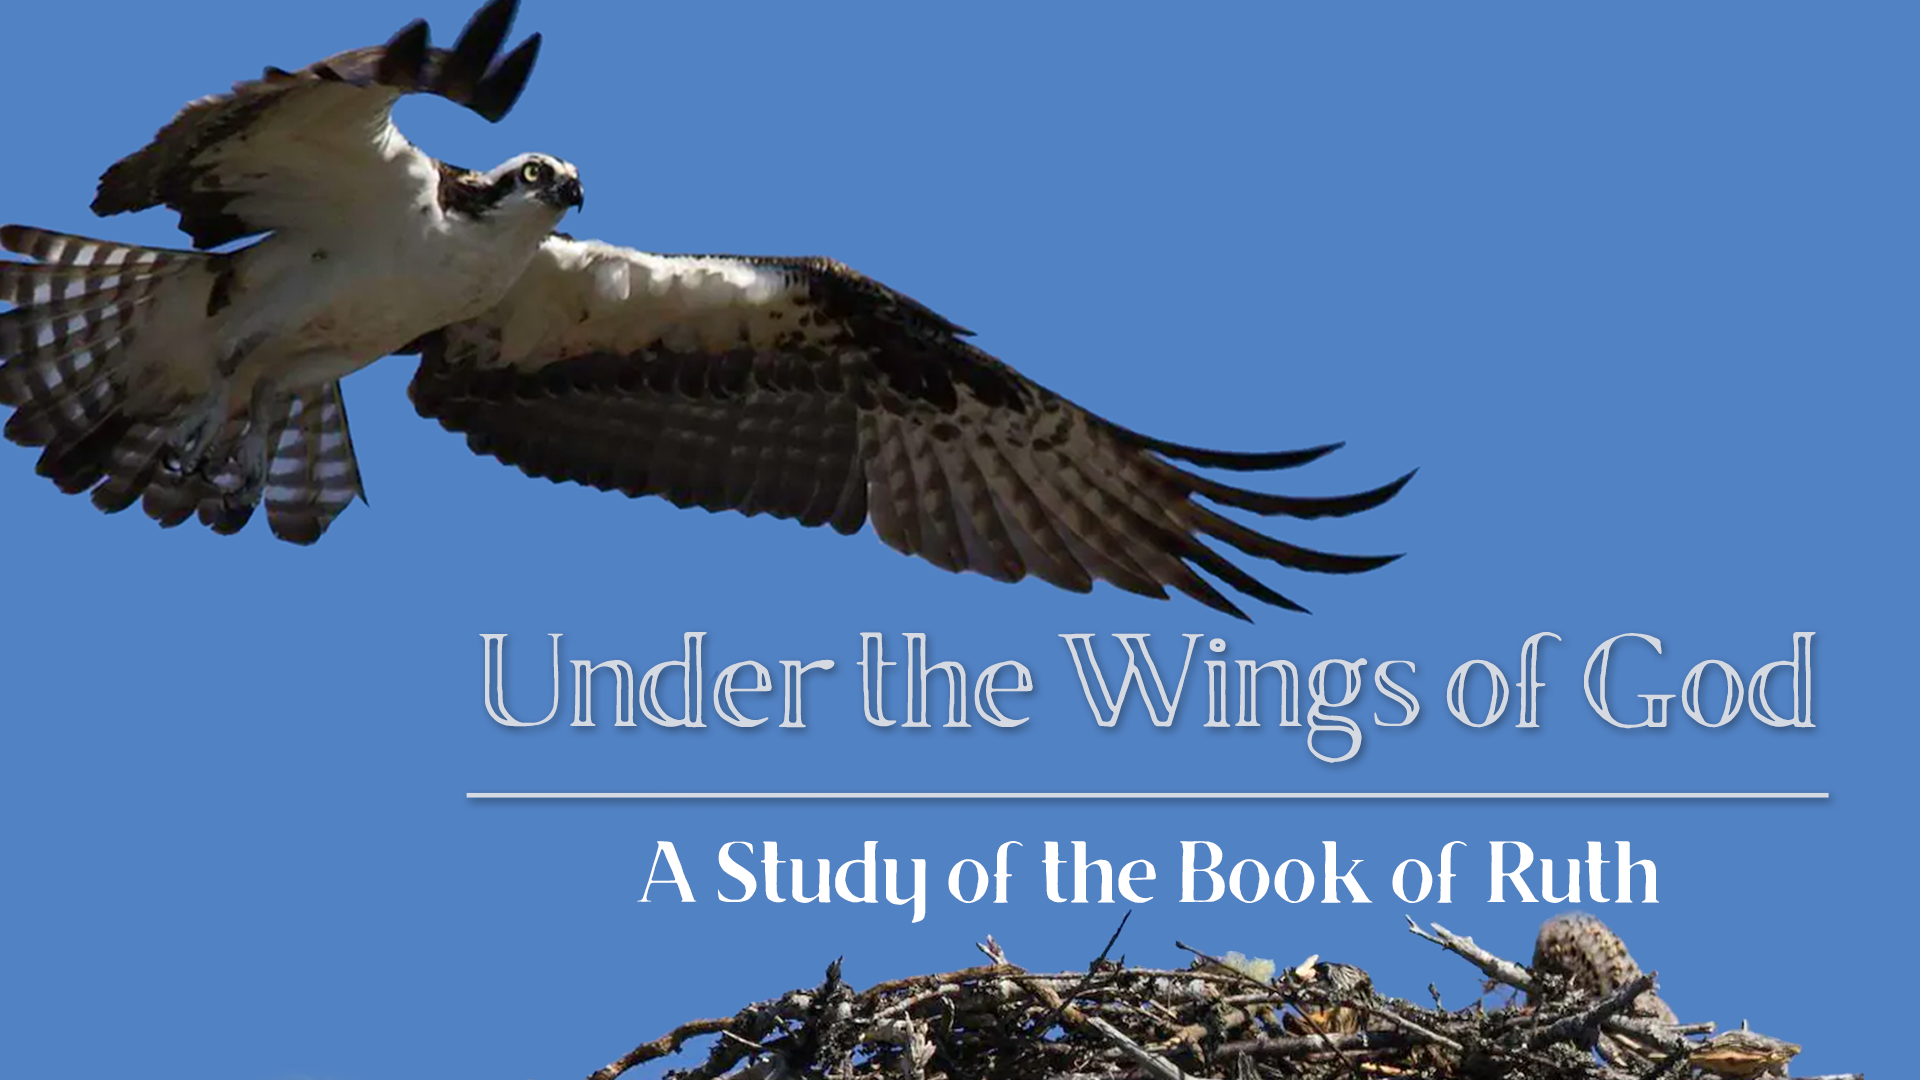 Under the wings website.png